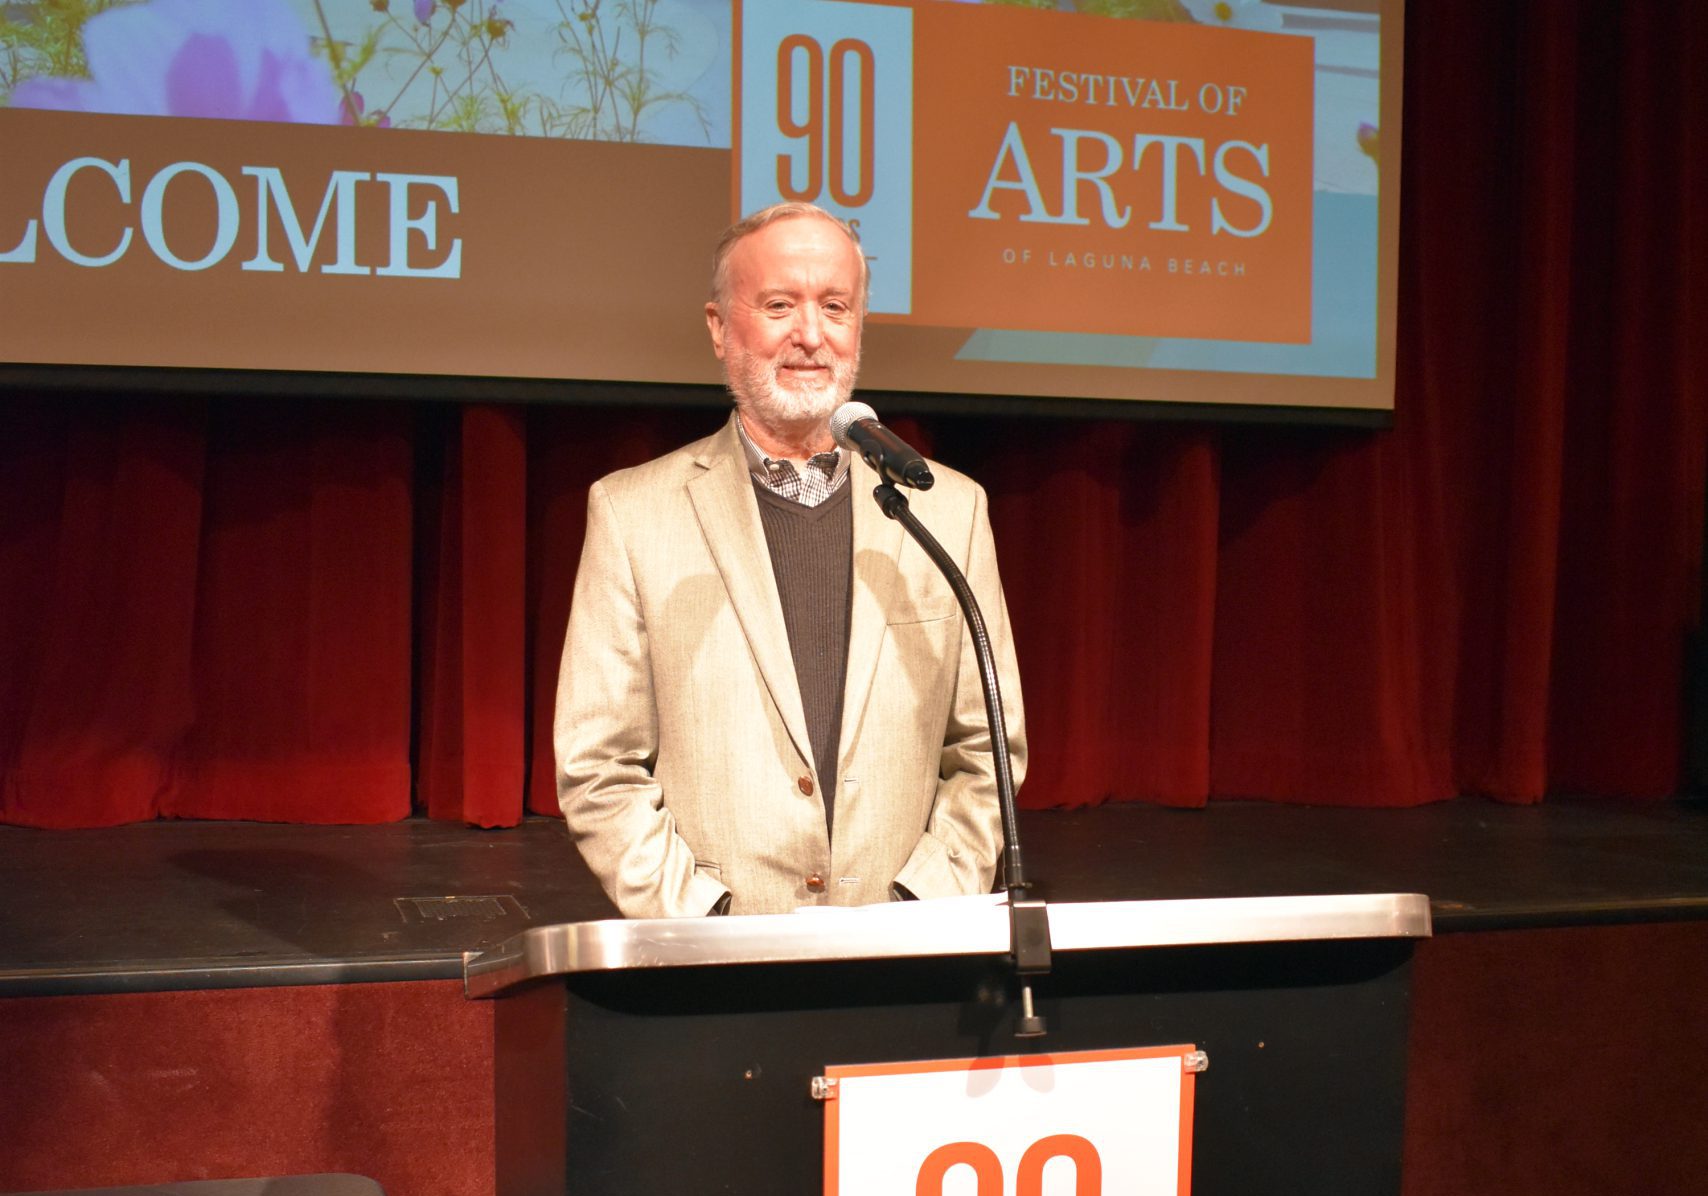 Pageant of the Masters Announces Ninetieth Anniversary 2023 Theme: Art  Colony: In the Company of Artists - Laguna Beach Local News